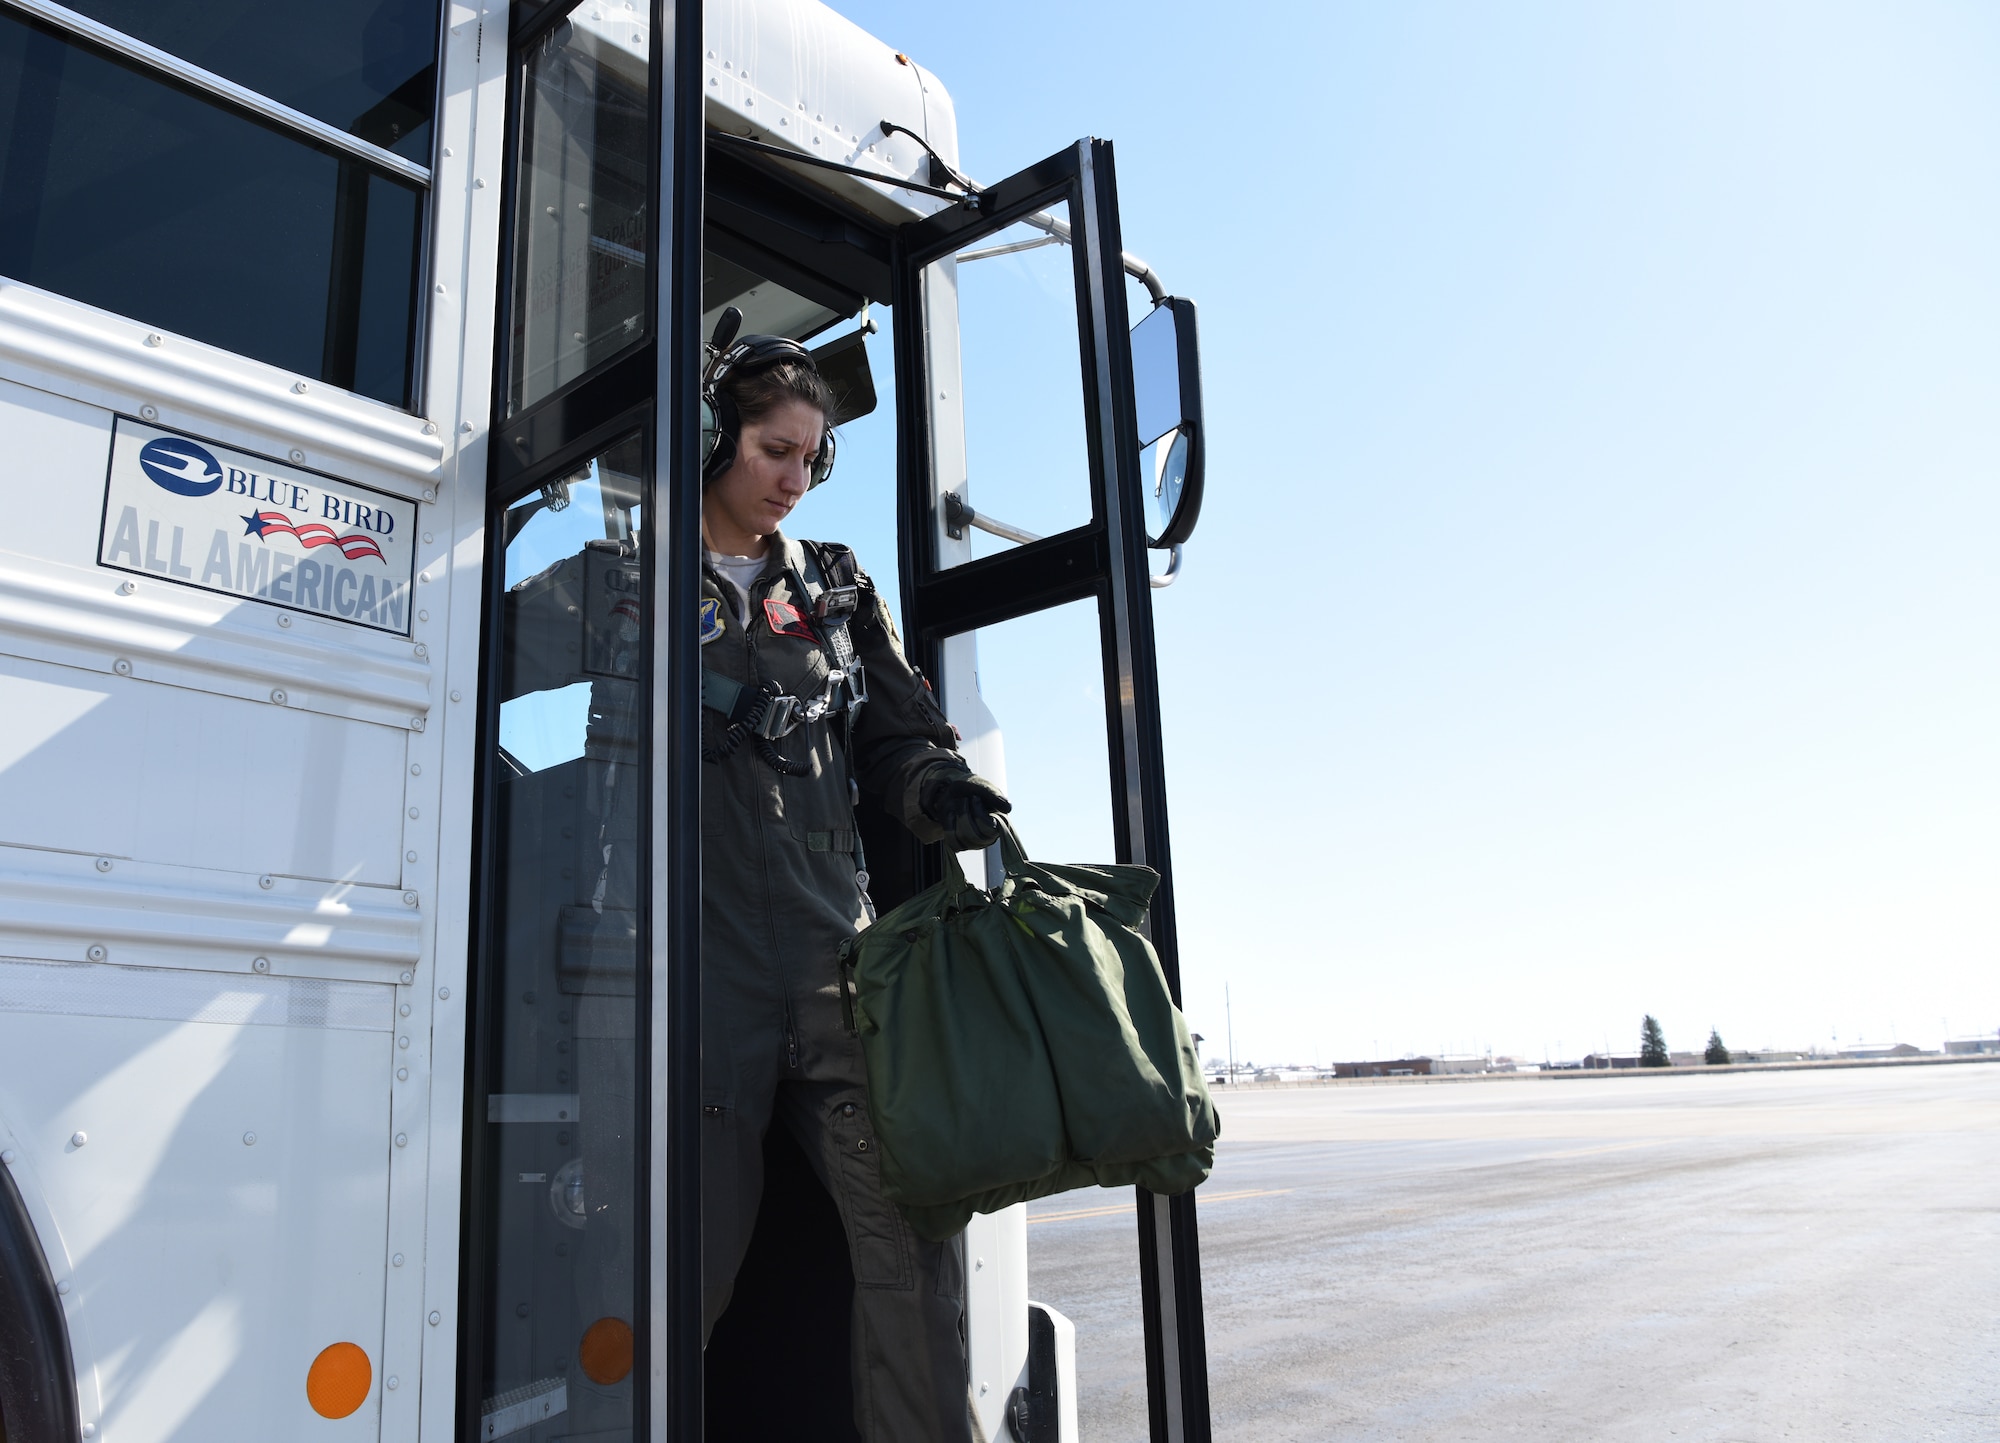 Capt. Lauren Olme, a 34th Bomb Squadron pilot, walks out to inspect her B-1 prior to an all-female flight out of Ellsworth Air Force Base, S.D., March 21, 2018. The flight was in honor of Women’s History Month and consisted of routine training in the local area. (U.S. Air Force photo by